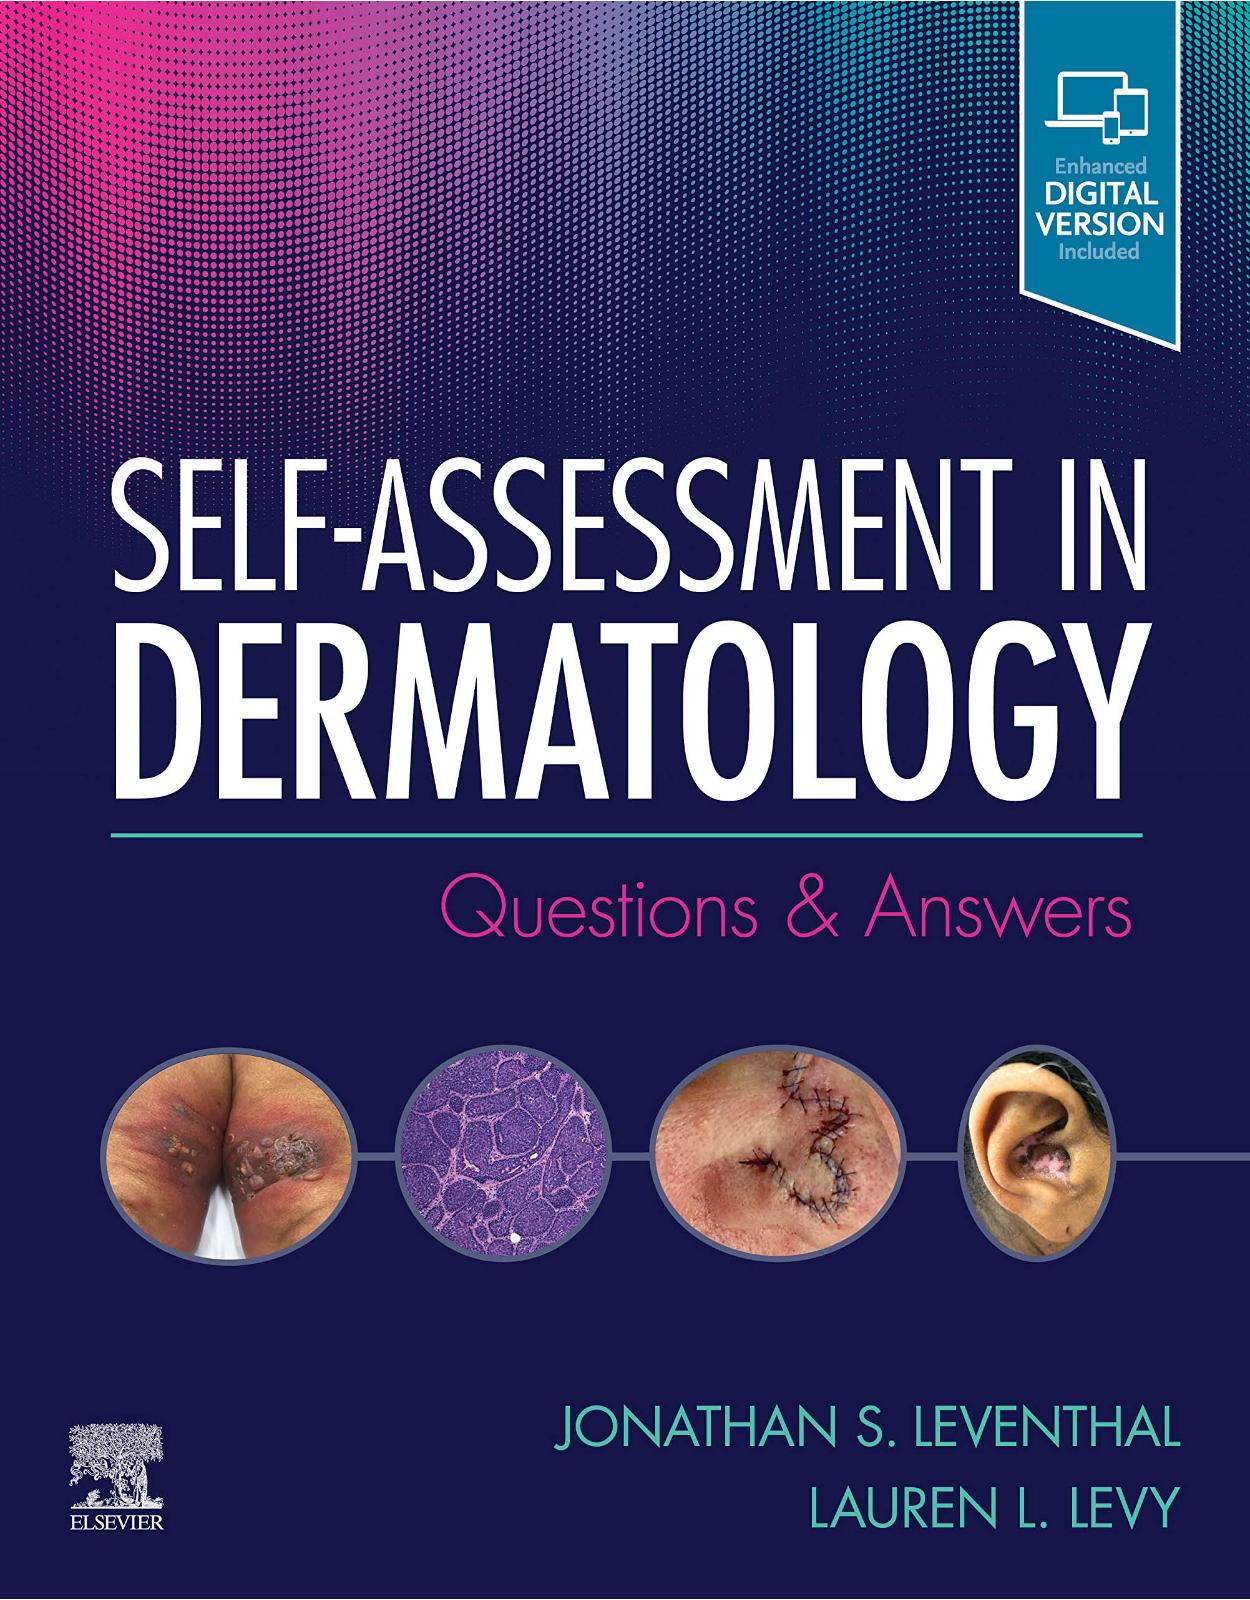 Self-Assessment in Dermatology, Questions and Answers